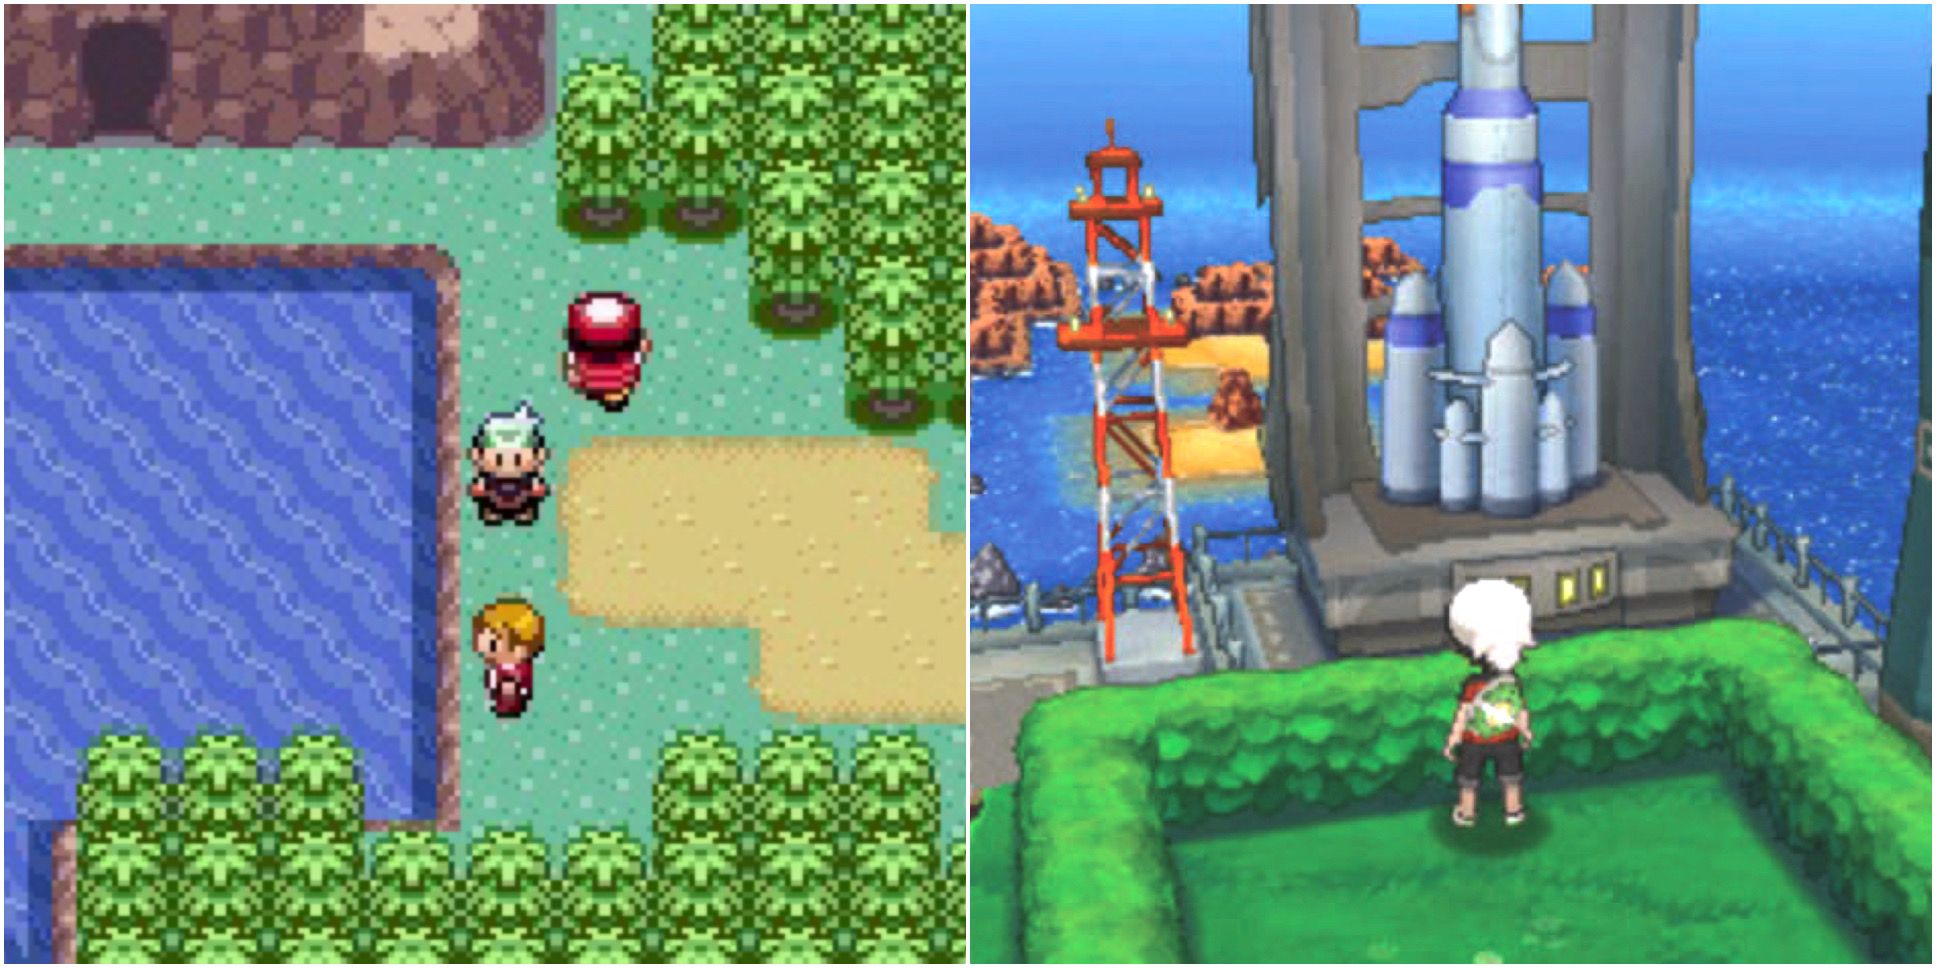 Comparison between ruby and sapphire and omega ruby and alpha sapphire